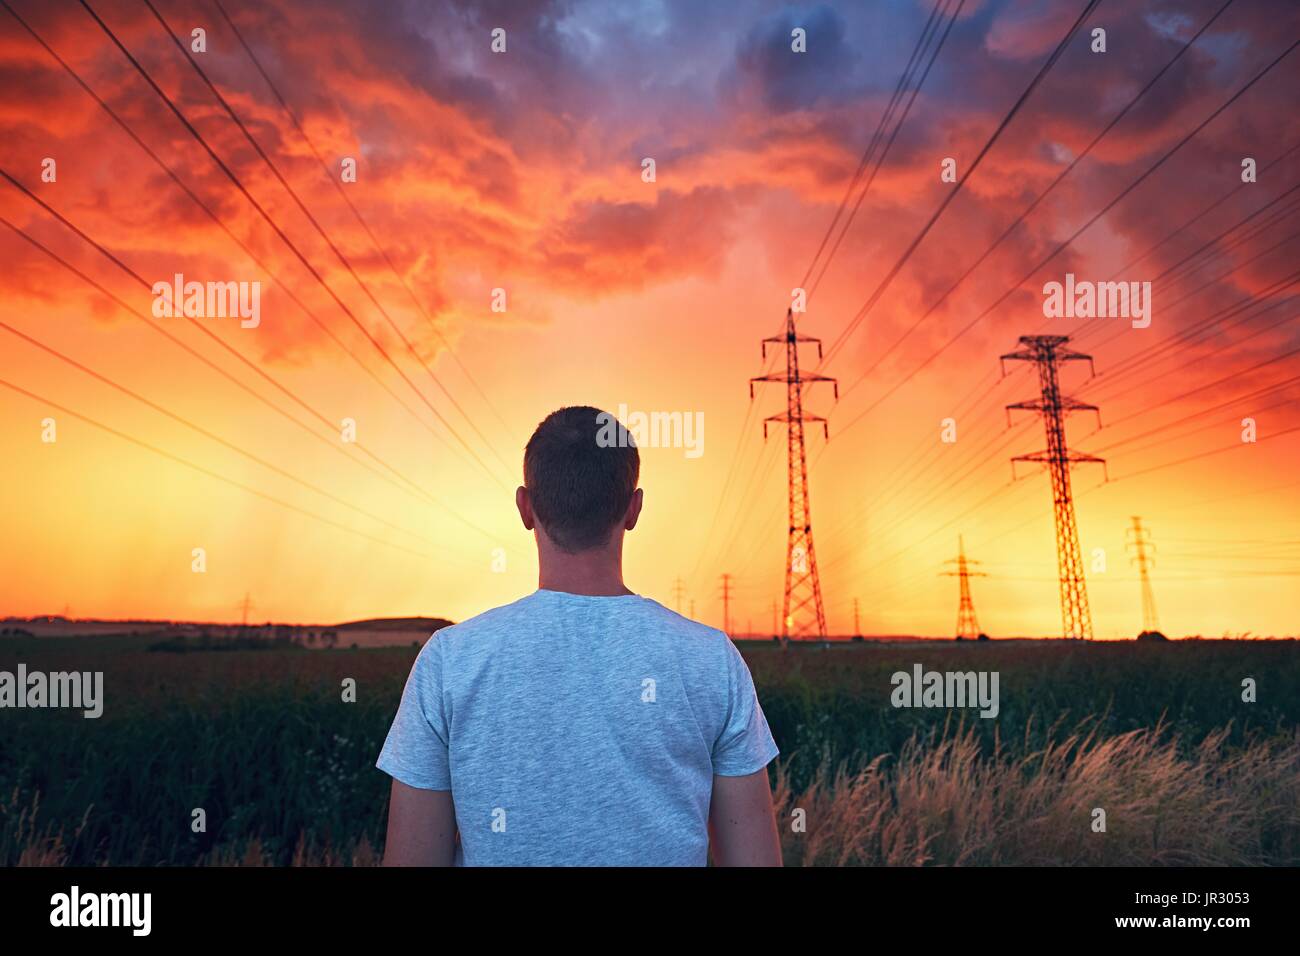 Dangerous weather. Lonely man in stunning storm during colorful sunset. Stock Photo